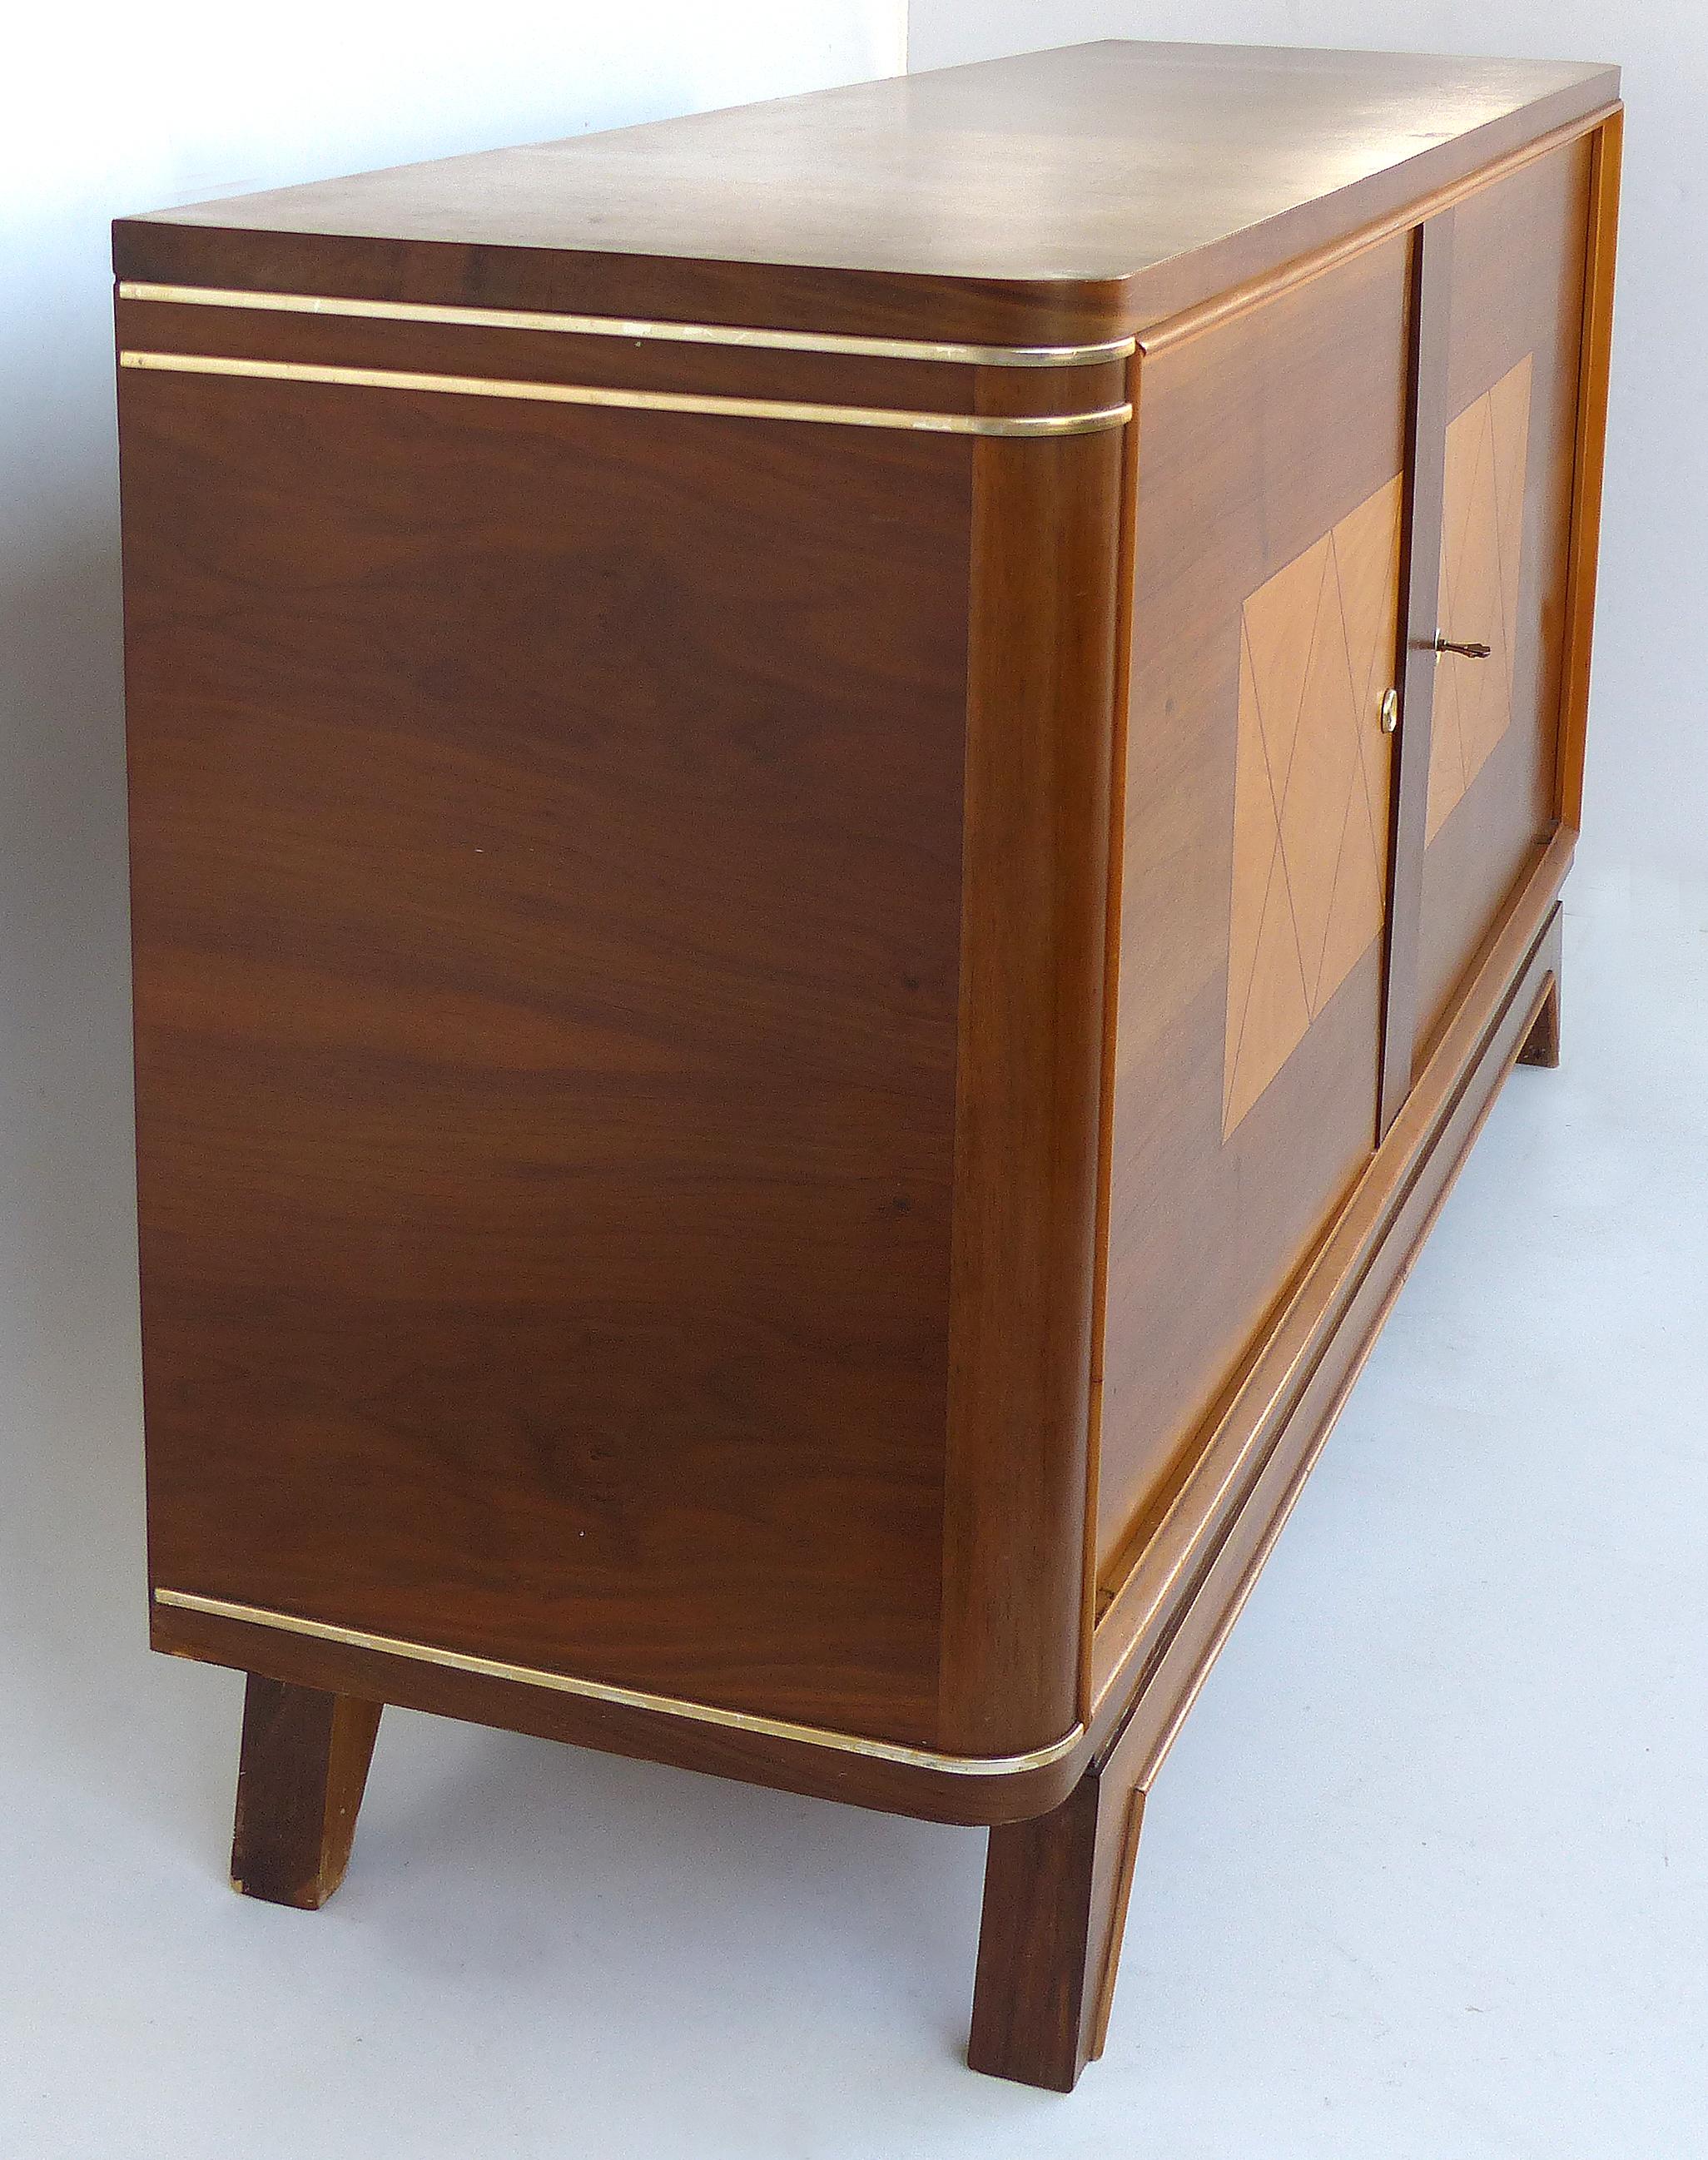 Wooden Art Deco Credenza with Two-Tone Pattern Doors

Offered for sale is an Art Deco two-tone wood credenza with two doors and splayed legs. The doors have an inlaid geometric designs with blonde bird's-eye maple interiors. These doors open to